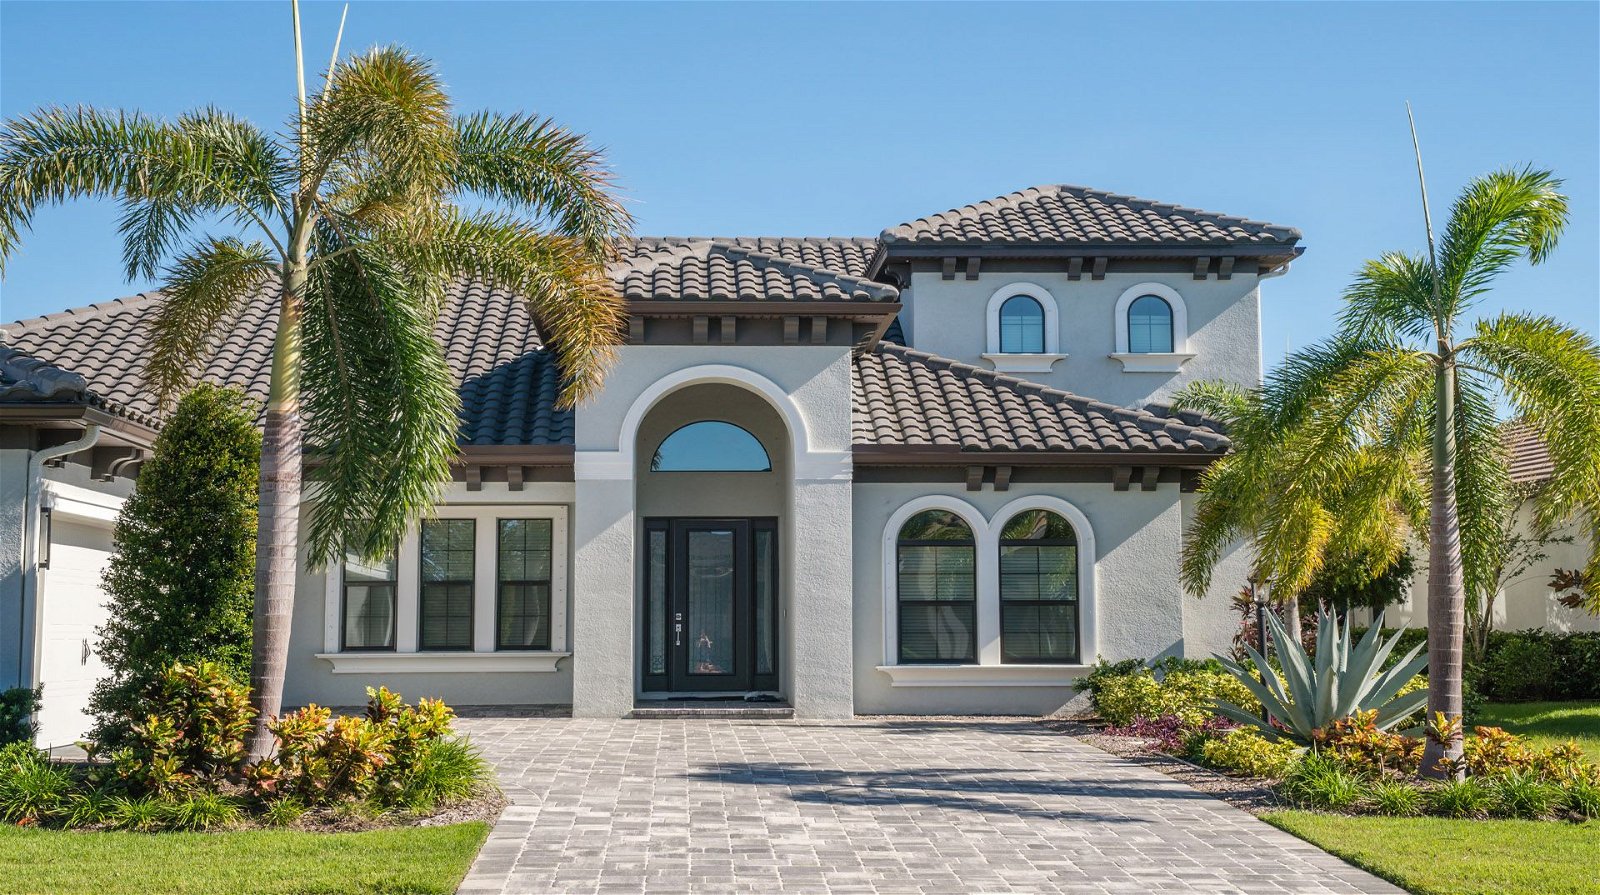 fort myers mortgage, fort myers mortgage rates, fort myers mortgage broker, fort myers mortgage lender, mortgage fort myers, fort myers mortgage condo financing, fort myers mortgage condo mortgages, fort myers condotel financing, fort myers condotel mortgage, fort myers condotel mortgage rates, fort myers mortgage calculator,